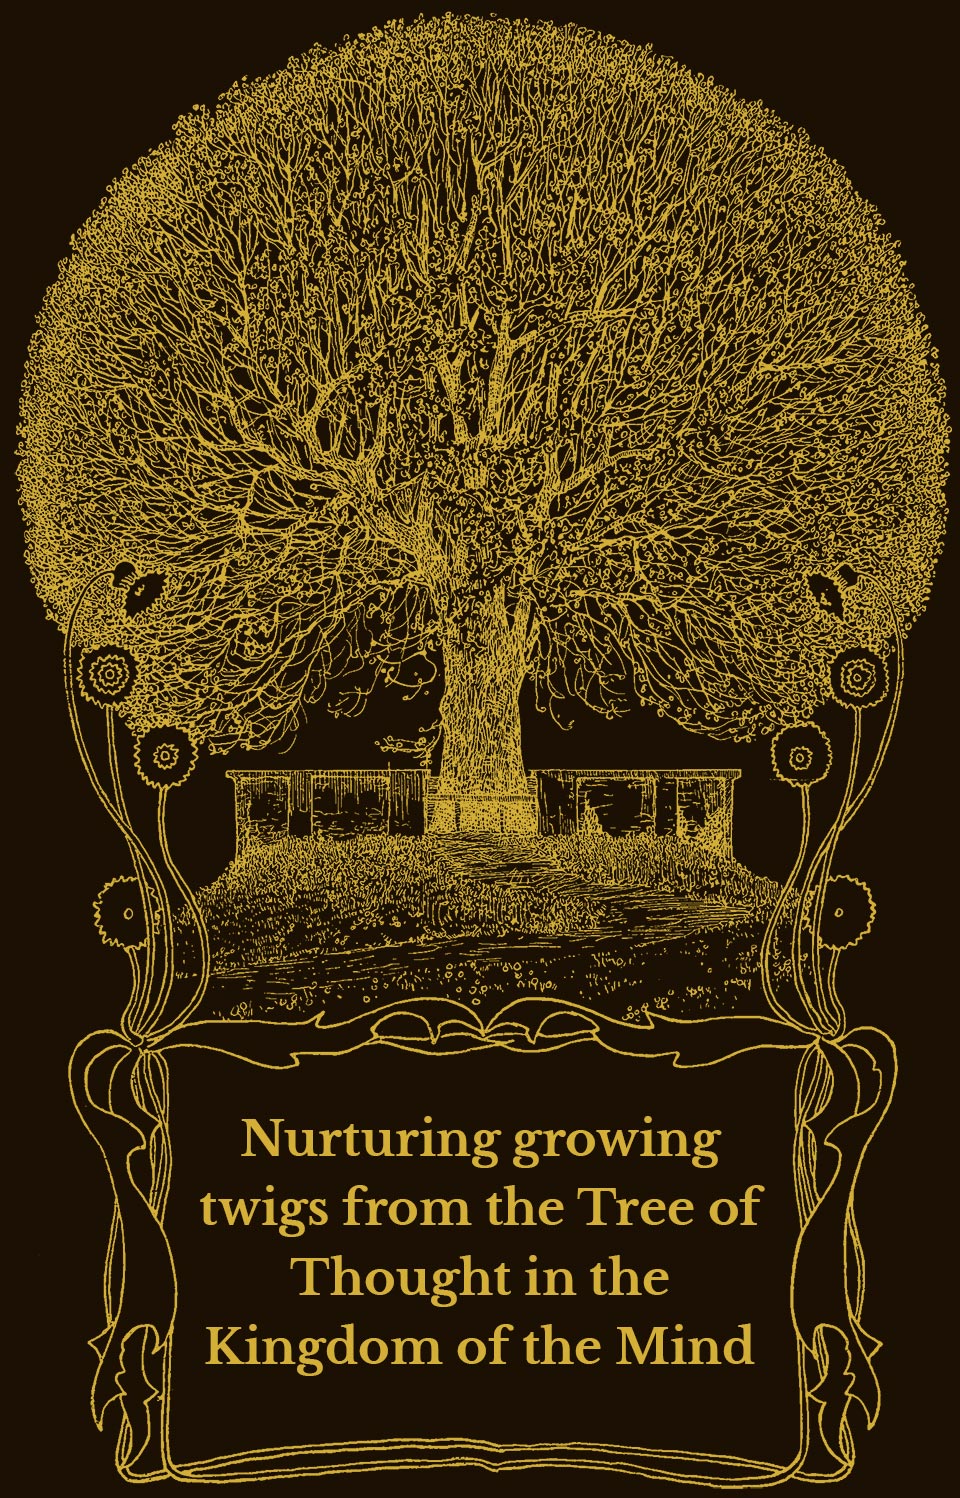 Nurturing growing twigs from the Tree of Thought in the Kingdom of the Mind